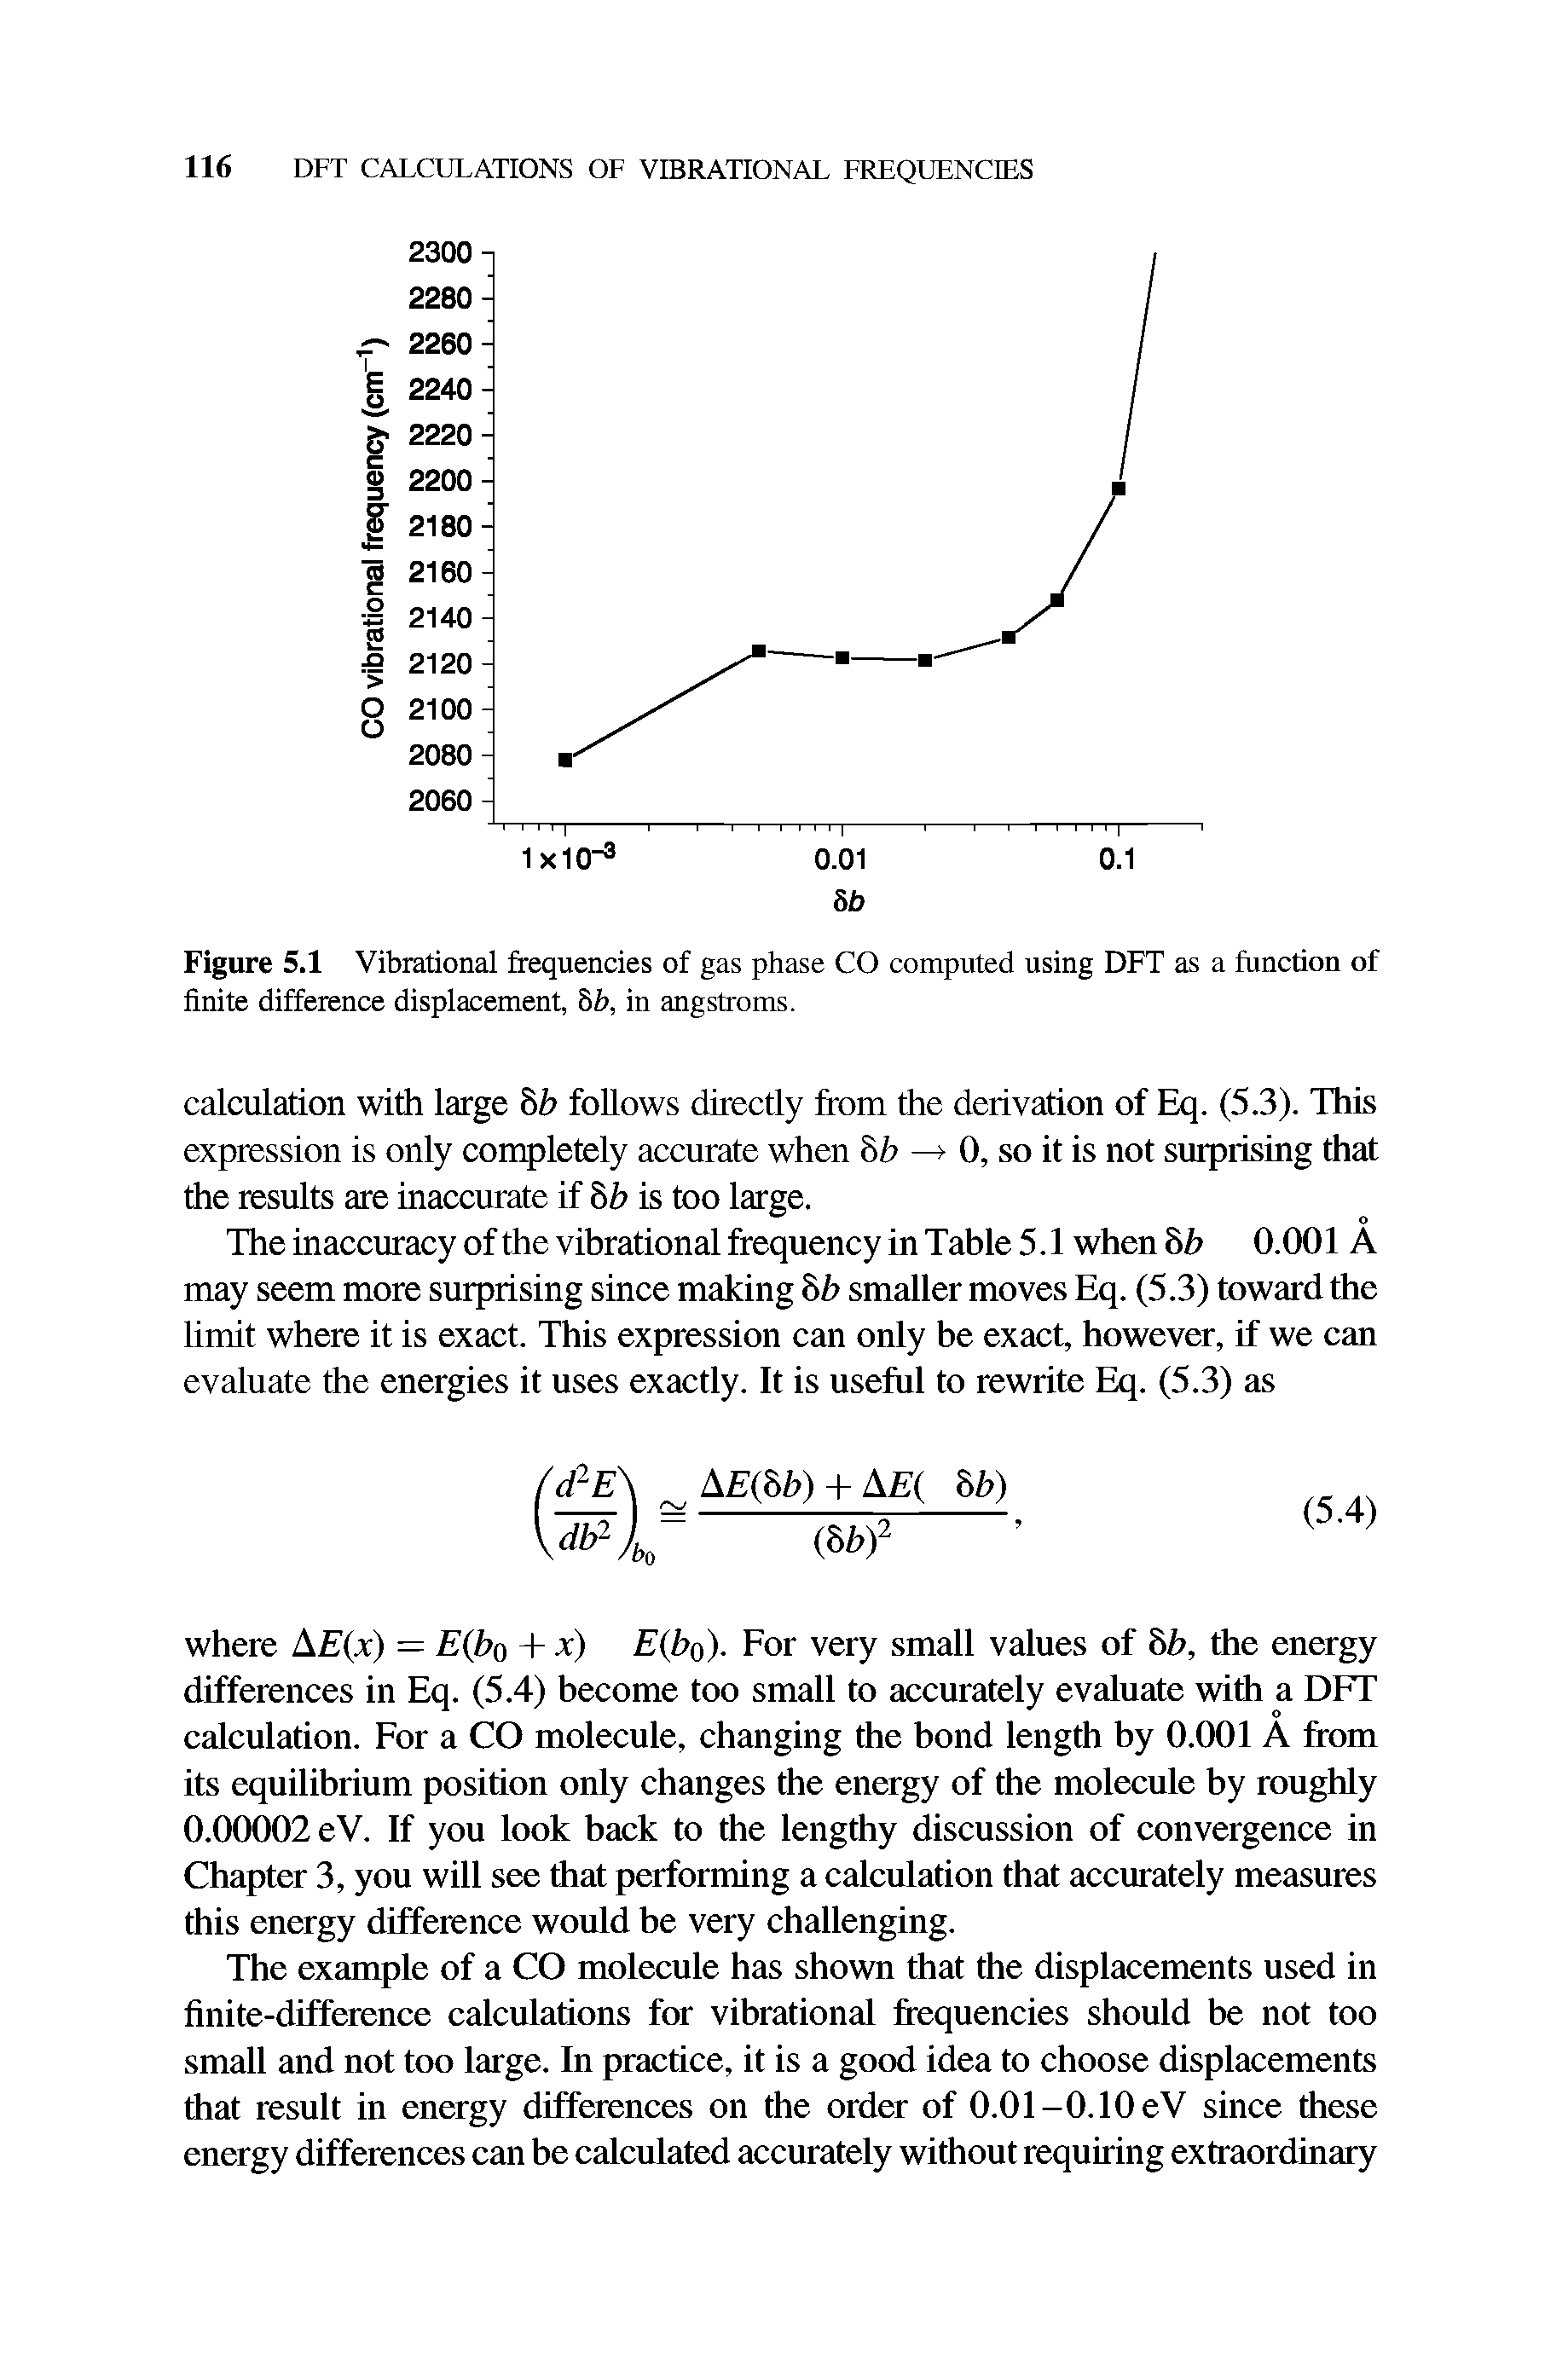 Figure 5.1 Vibrational frequencies of gas phase CO computed using DFT as a function of finite difference displacement, 8b, in angstroms.